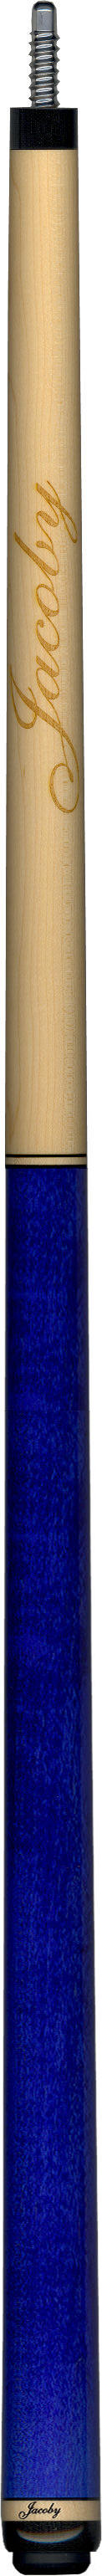 Jacoby MAG-1 Pool Cue